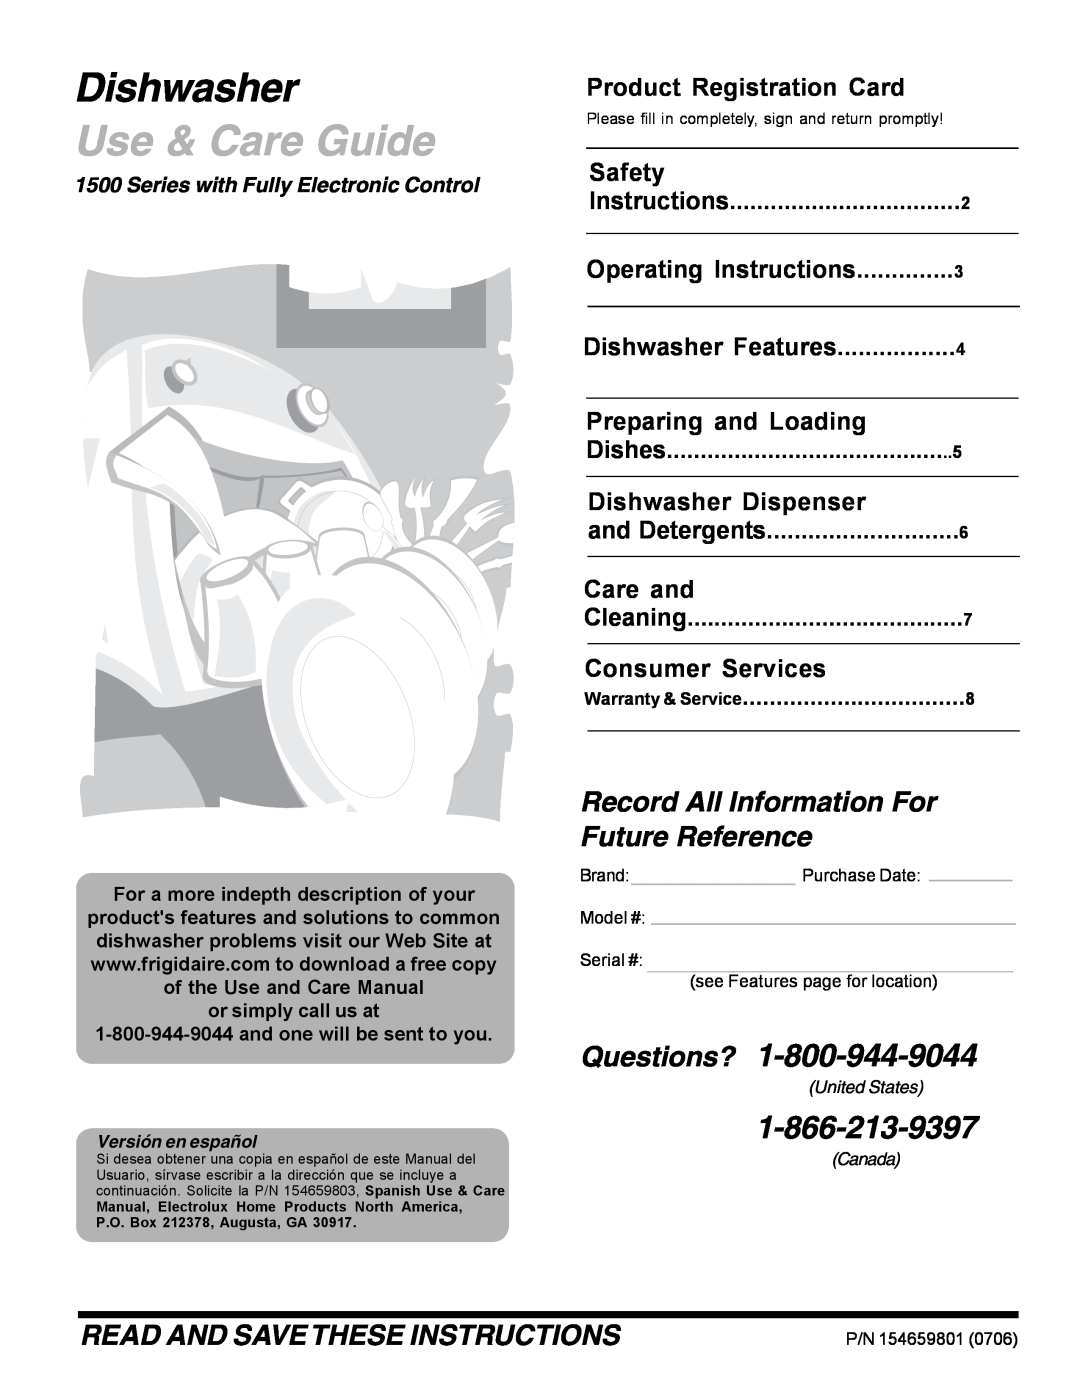 Frigidaire 1500 Series warranty Product Registration Card, Safety, Preparing and Loading, Dishes, Dishwasher Dispenser 